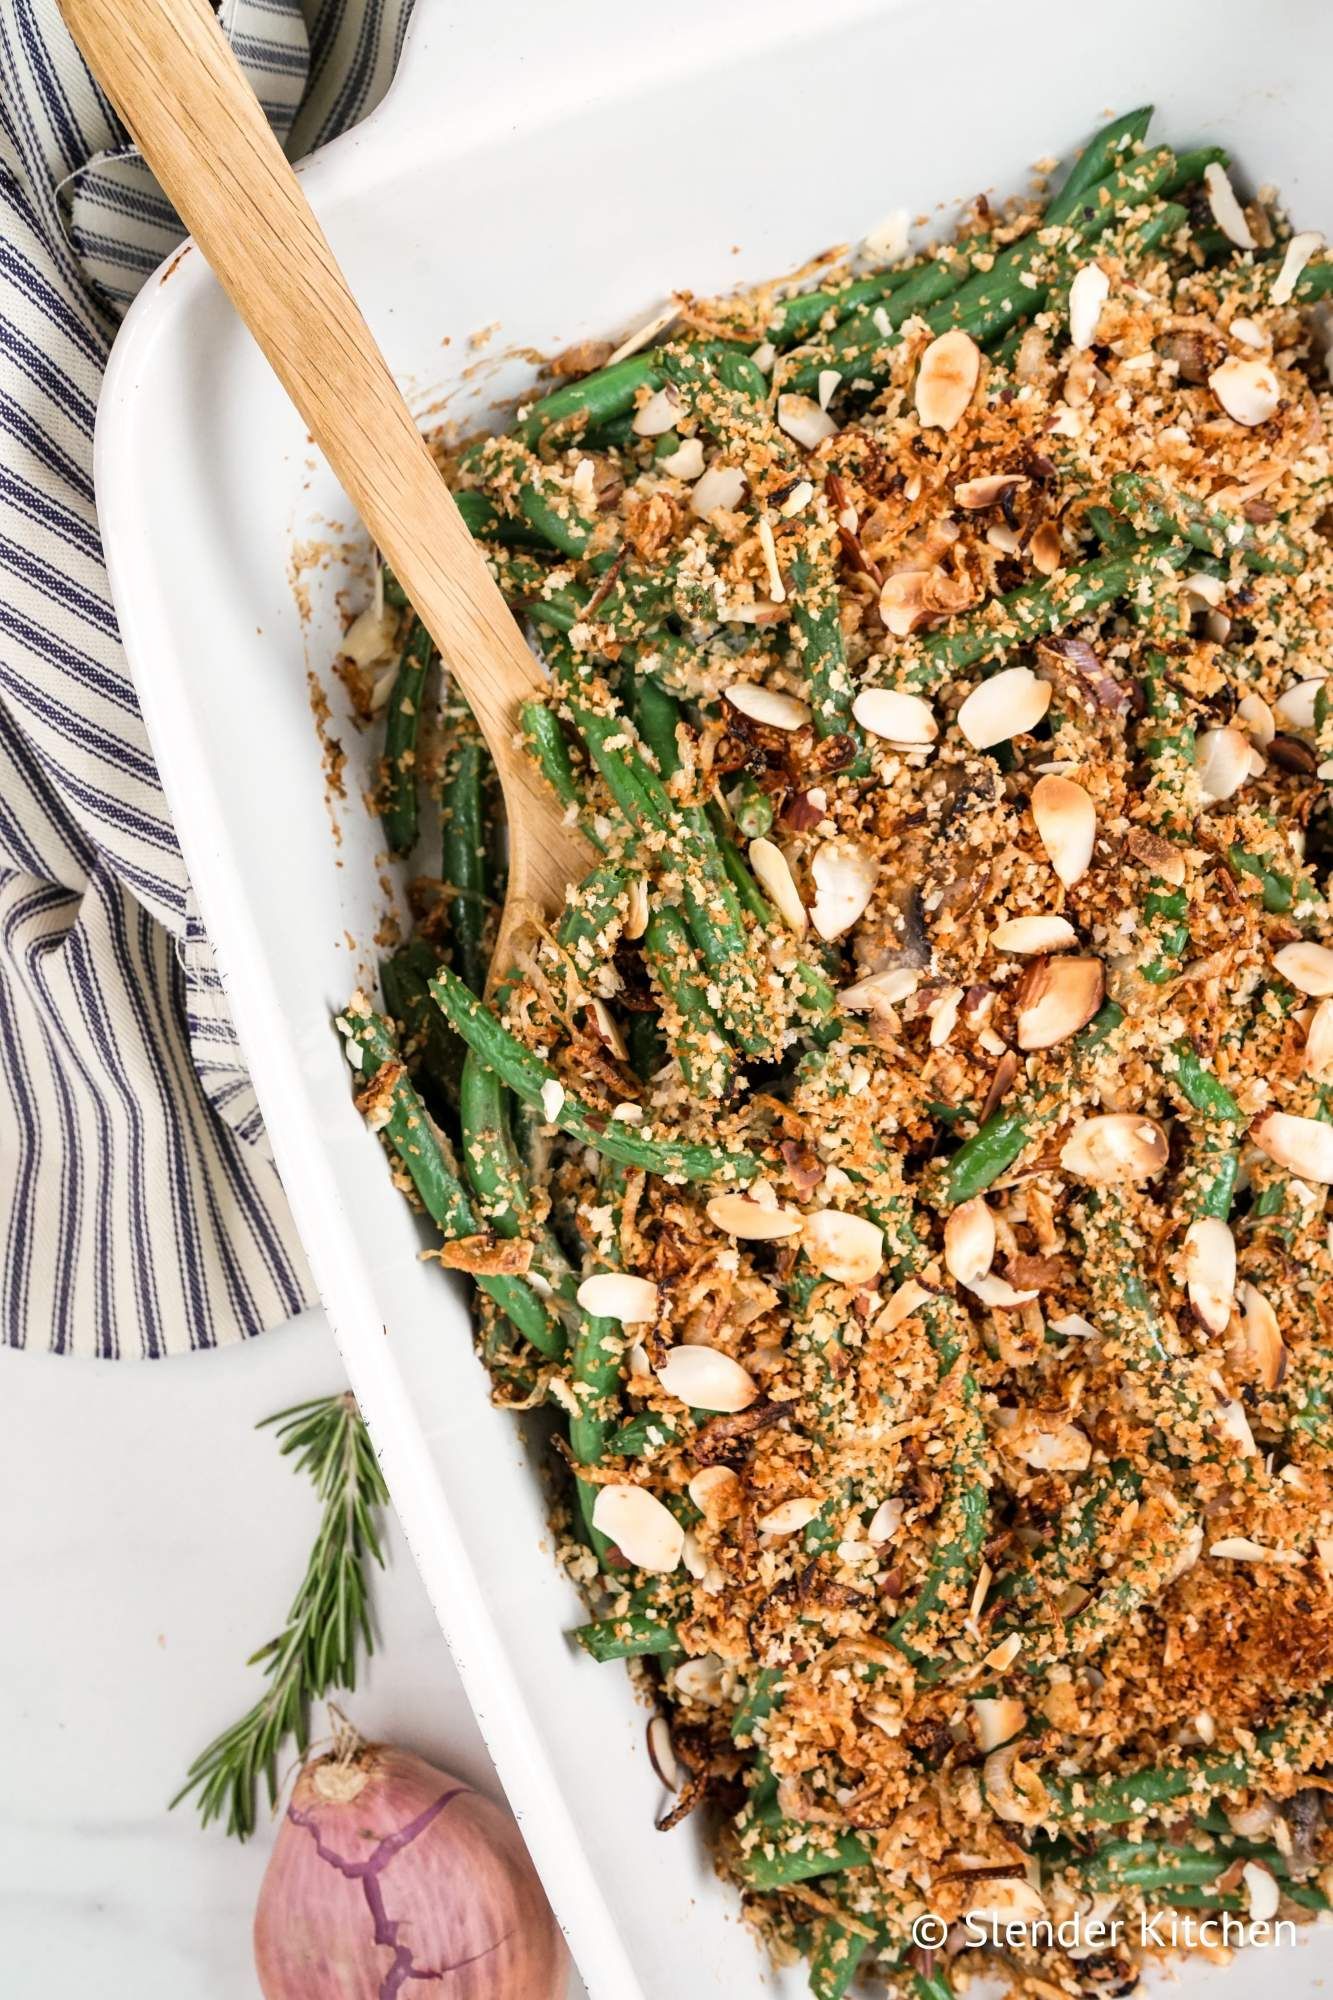 Healthy green bean casserole with crispy onions and almonds in a baking dish with a wooden spoon.